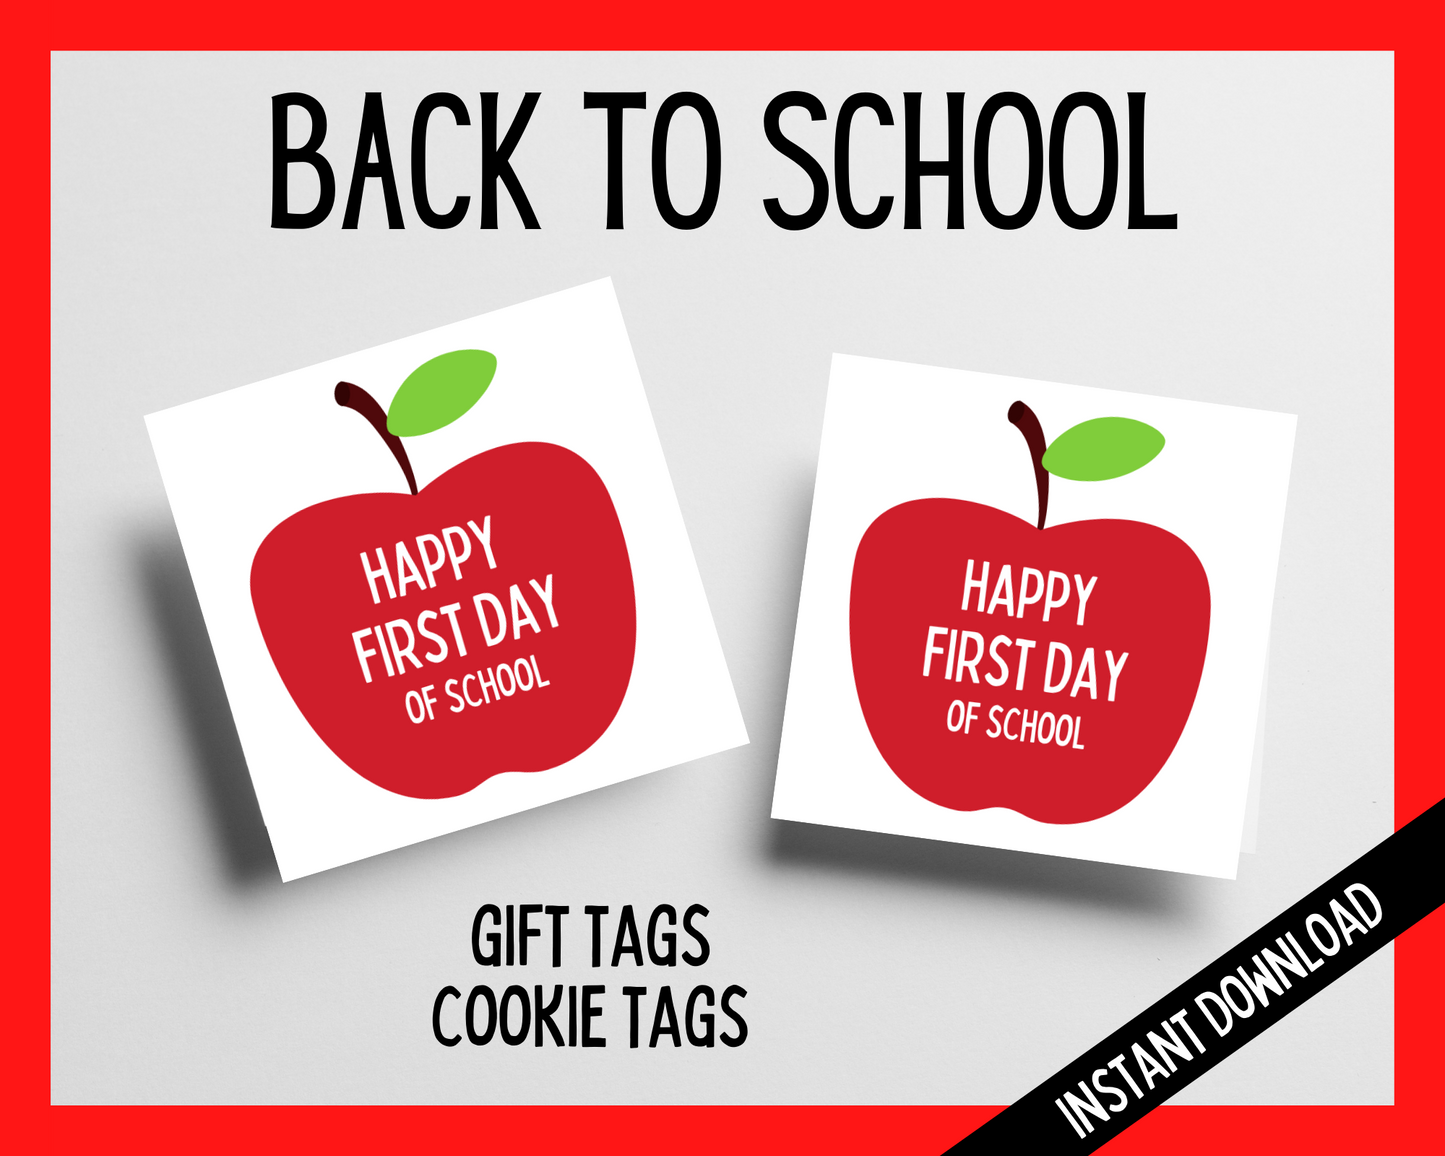 Happy First Day of School Gift Tags